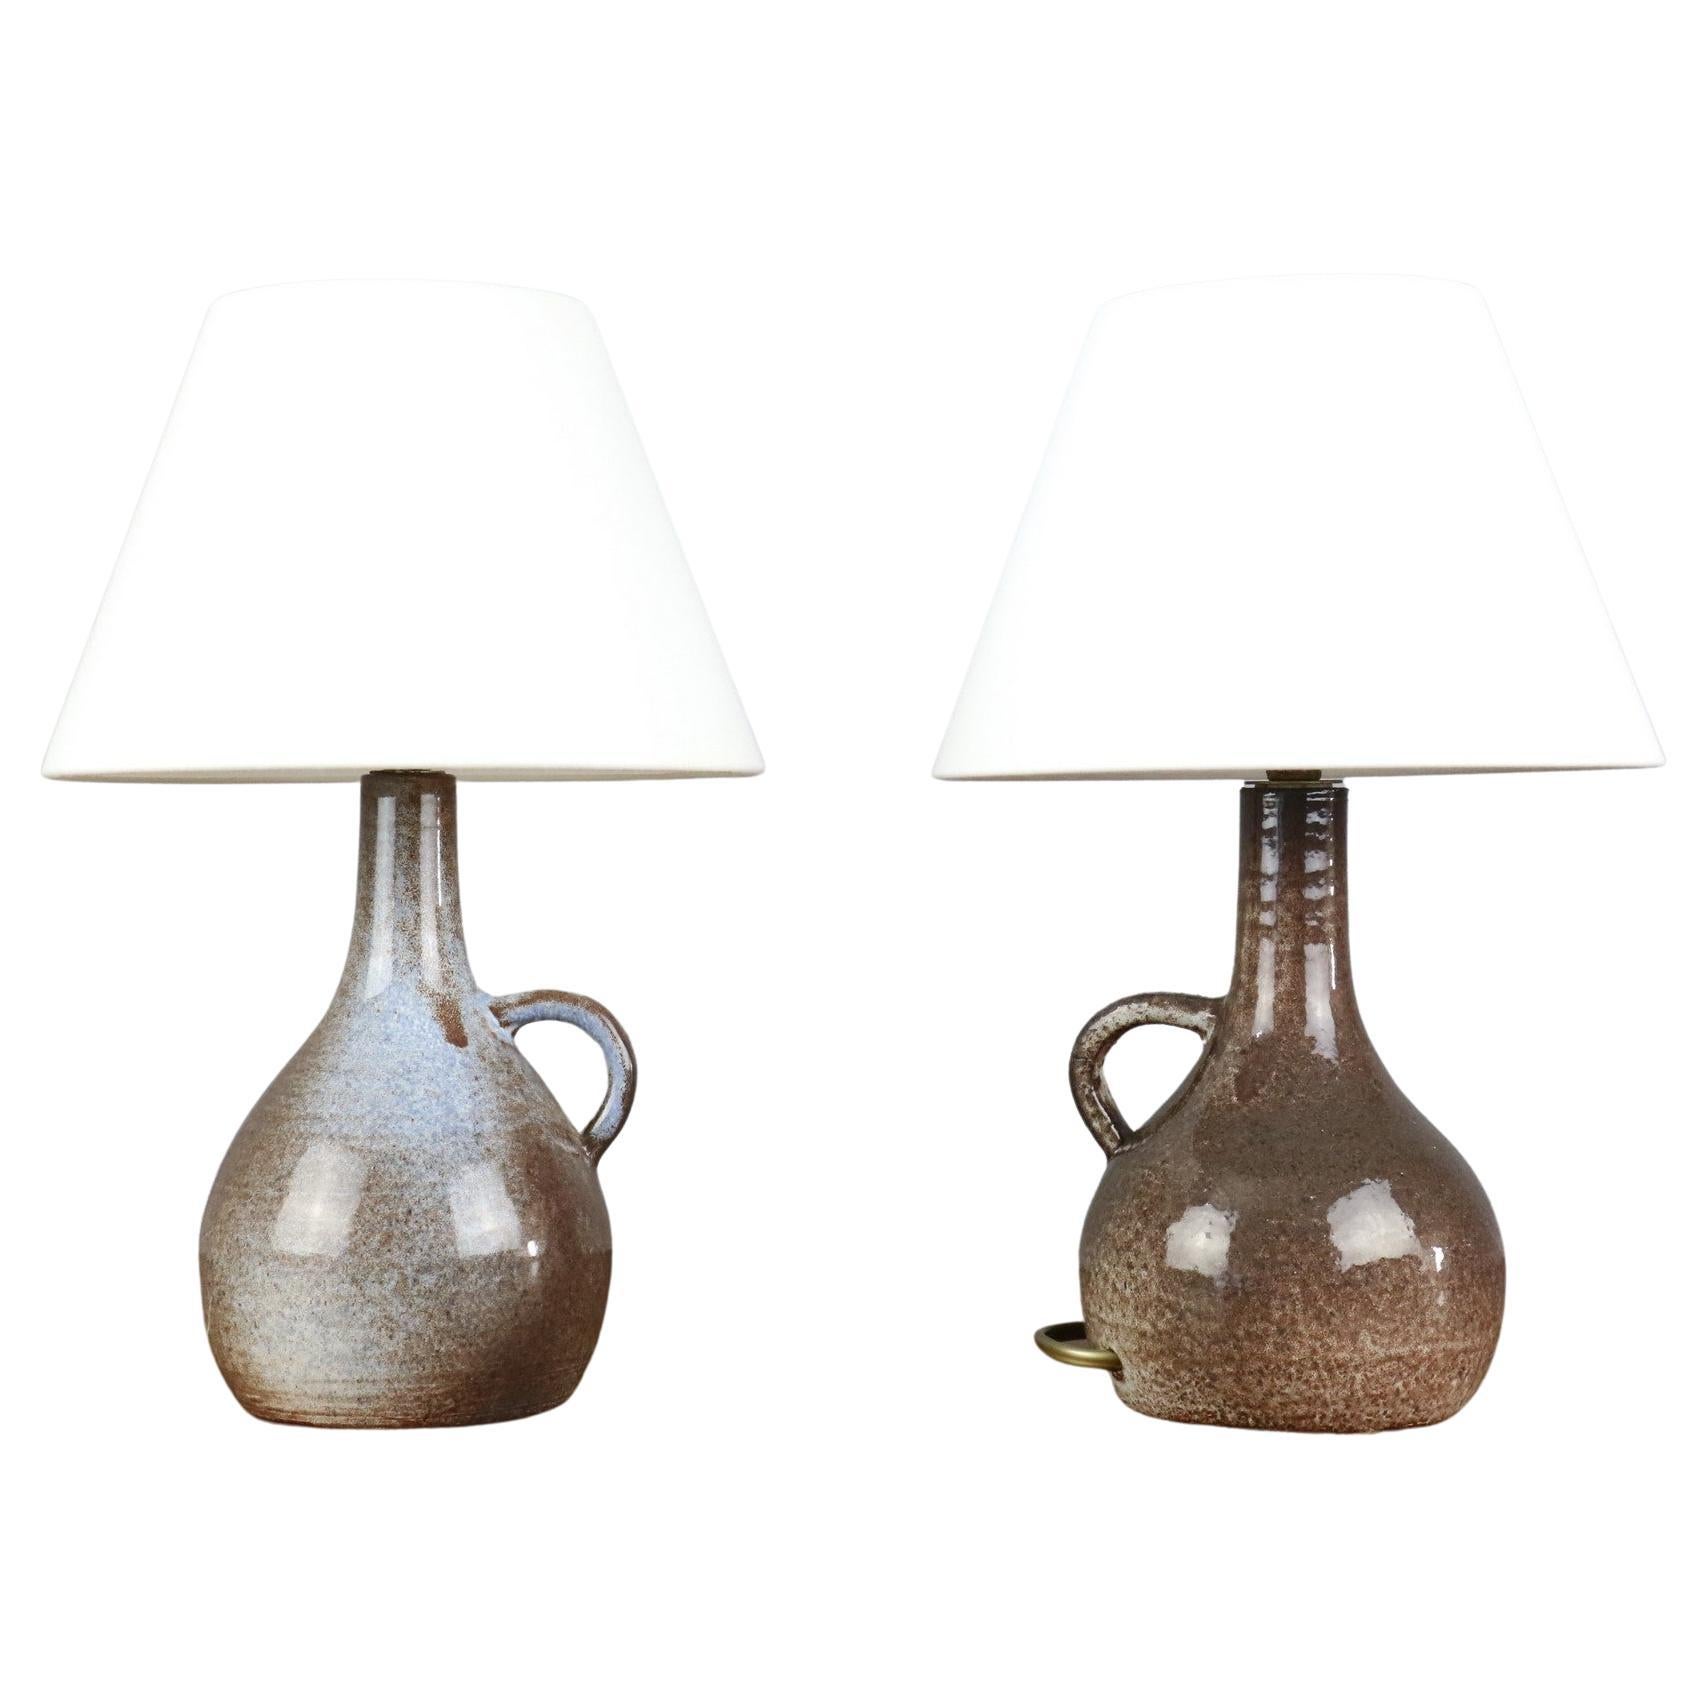 Pair of Mid-century ceramic lamps by Robert Chiazzo, 1960s For Sale